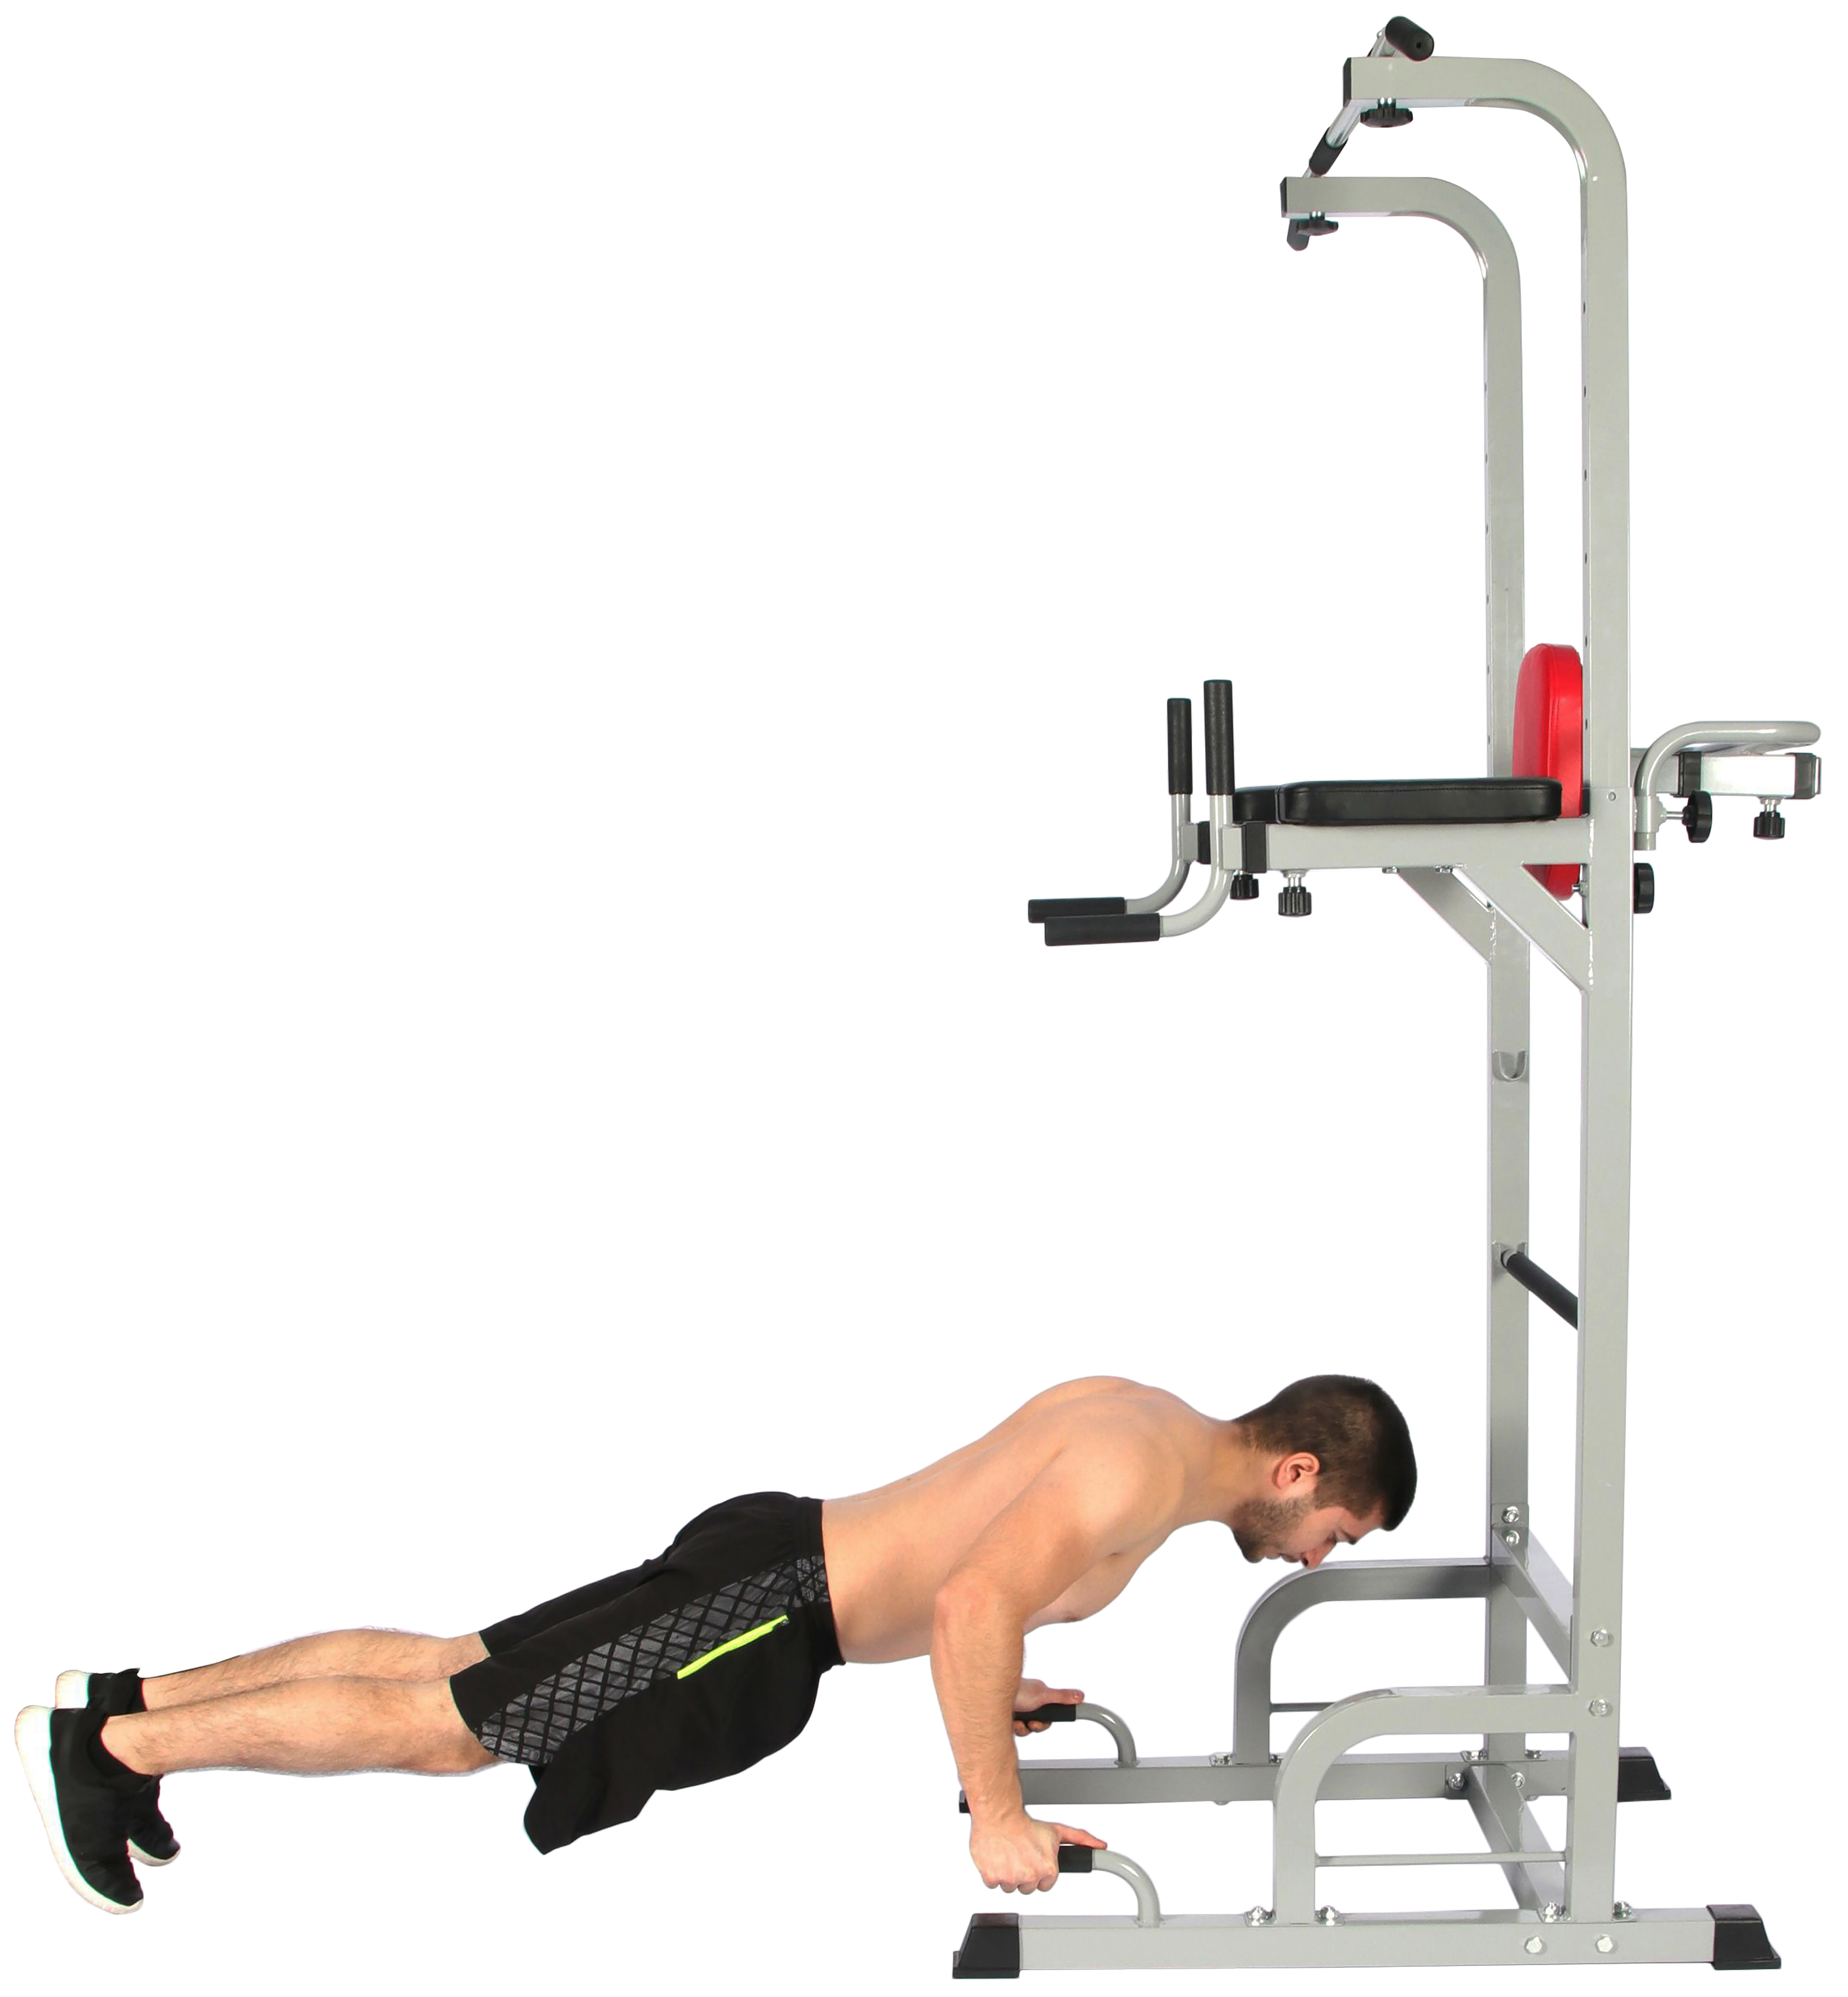 Everyday Essentials Power Tower with Push-up, Pull-up and Workout Dip Station for Home Gym Strength Training - image 5 of 6